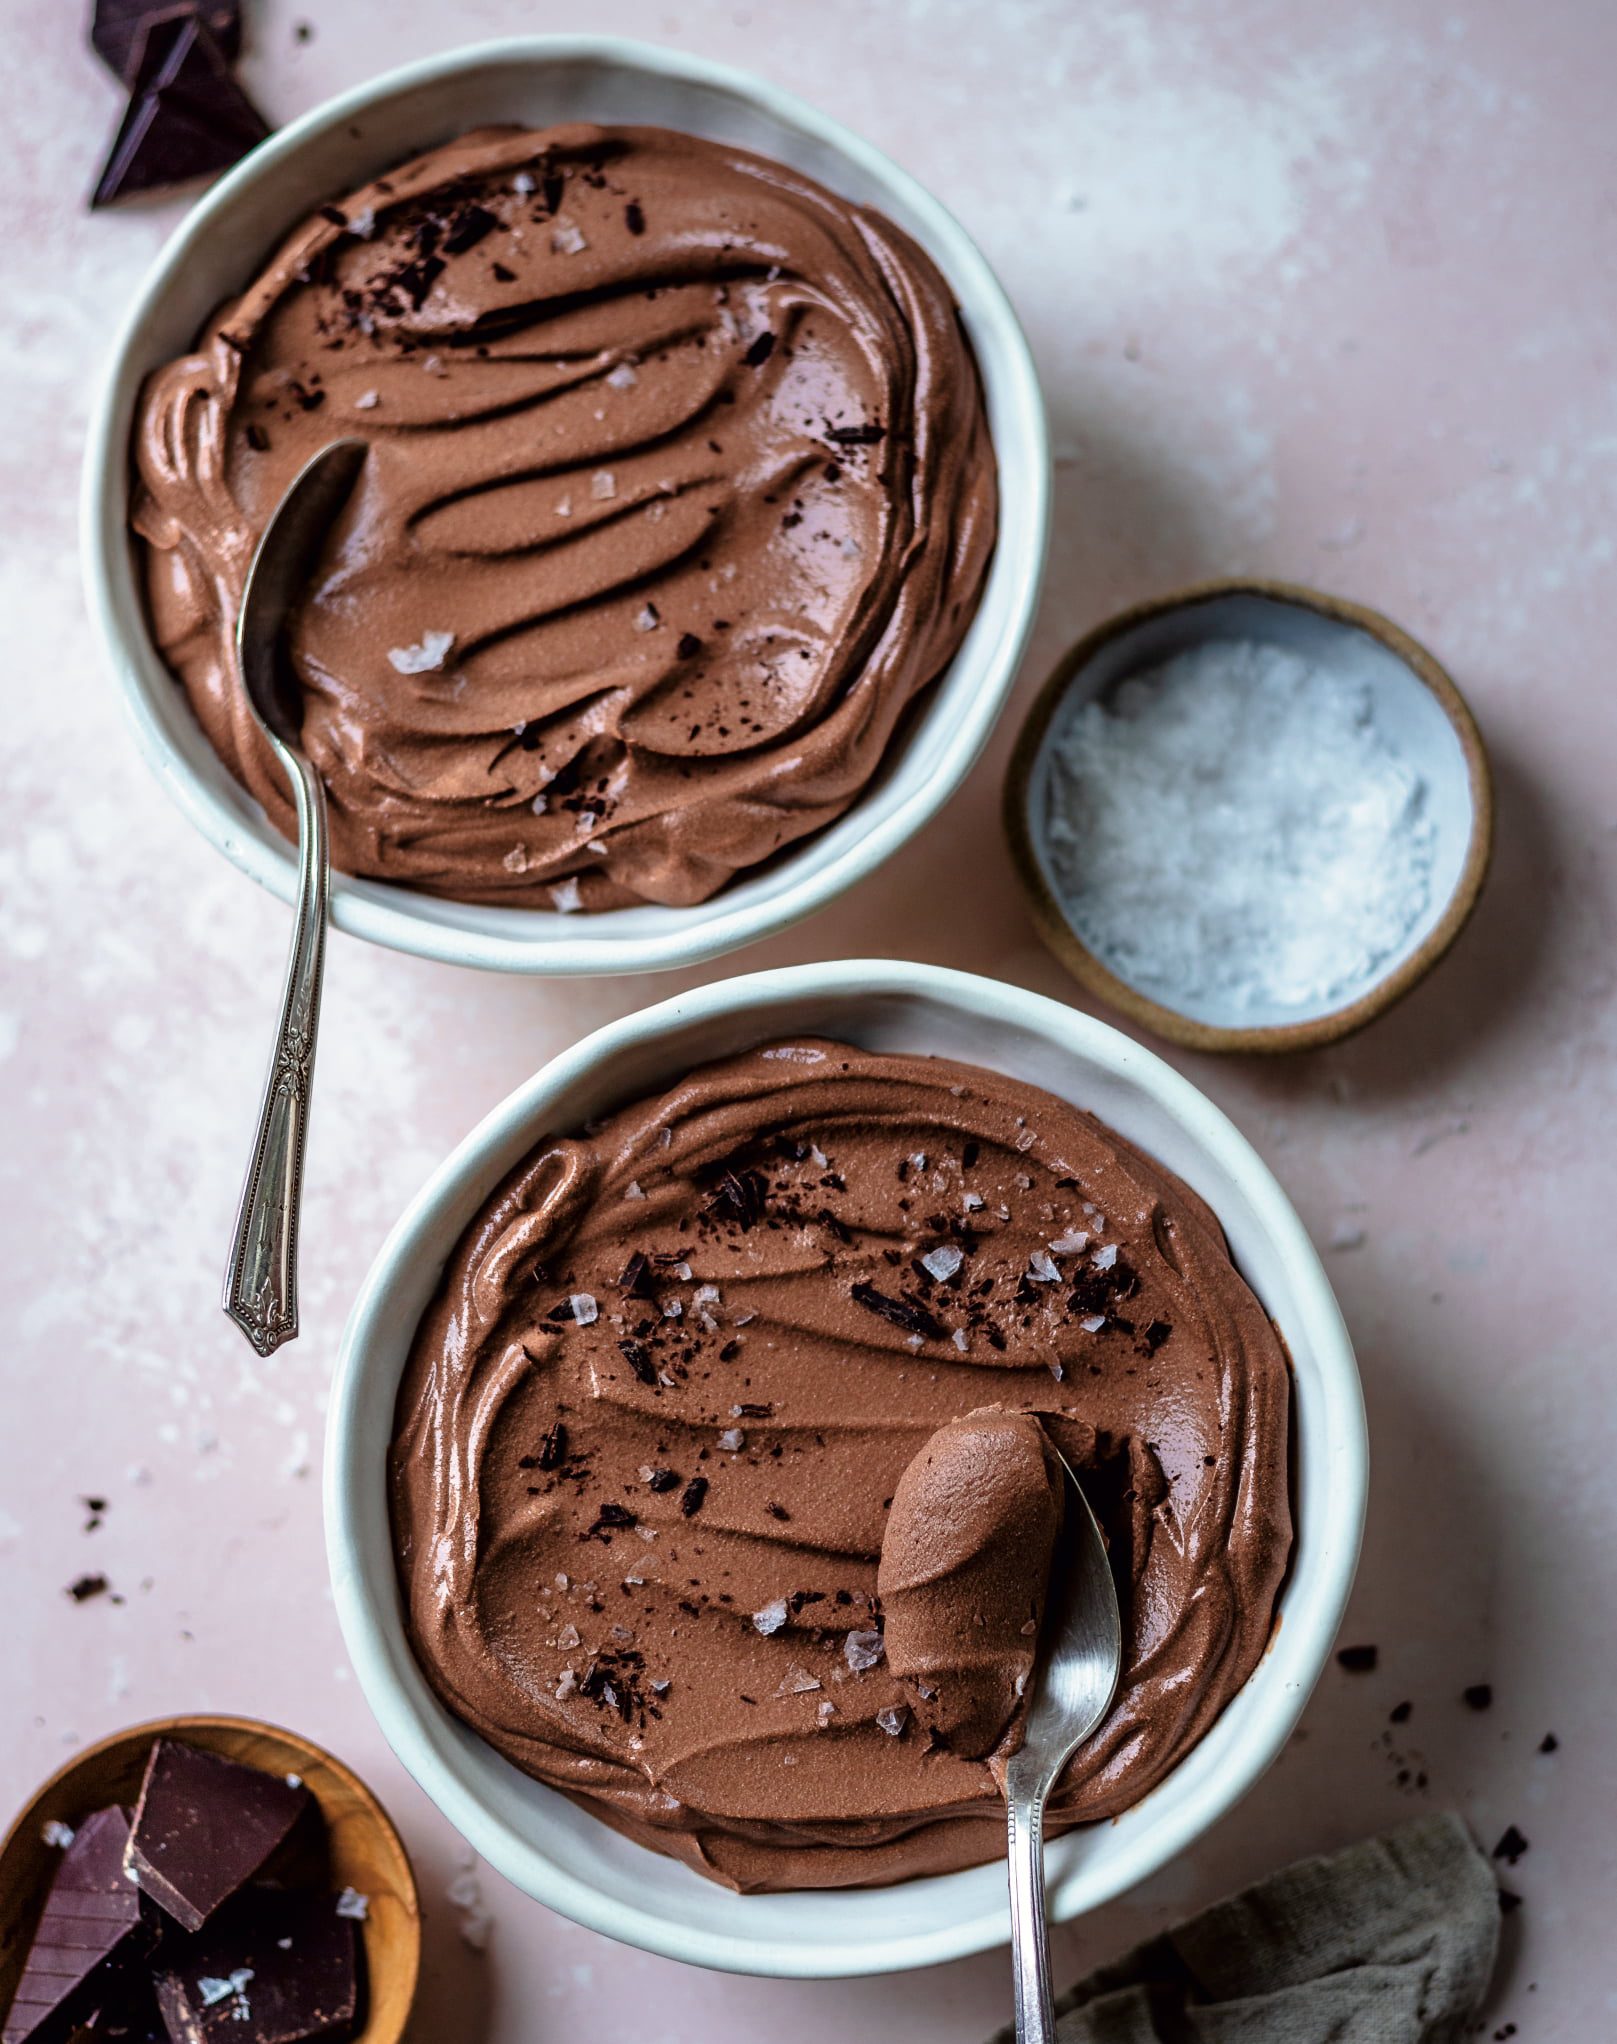 vegan-mousse-au-chocolat-from-the-two-spoons-cookbook-by-hannah ...